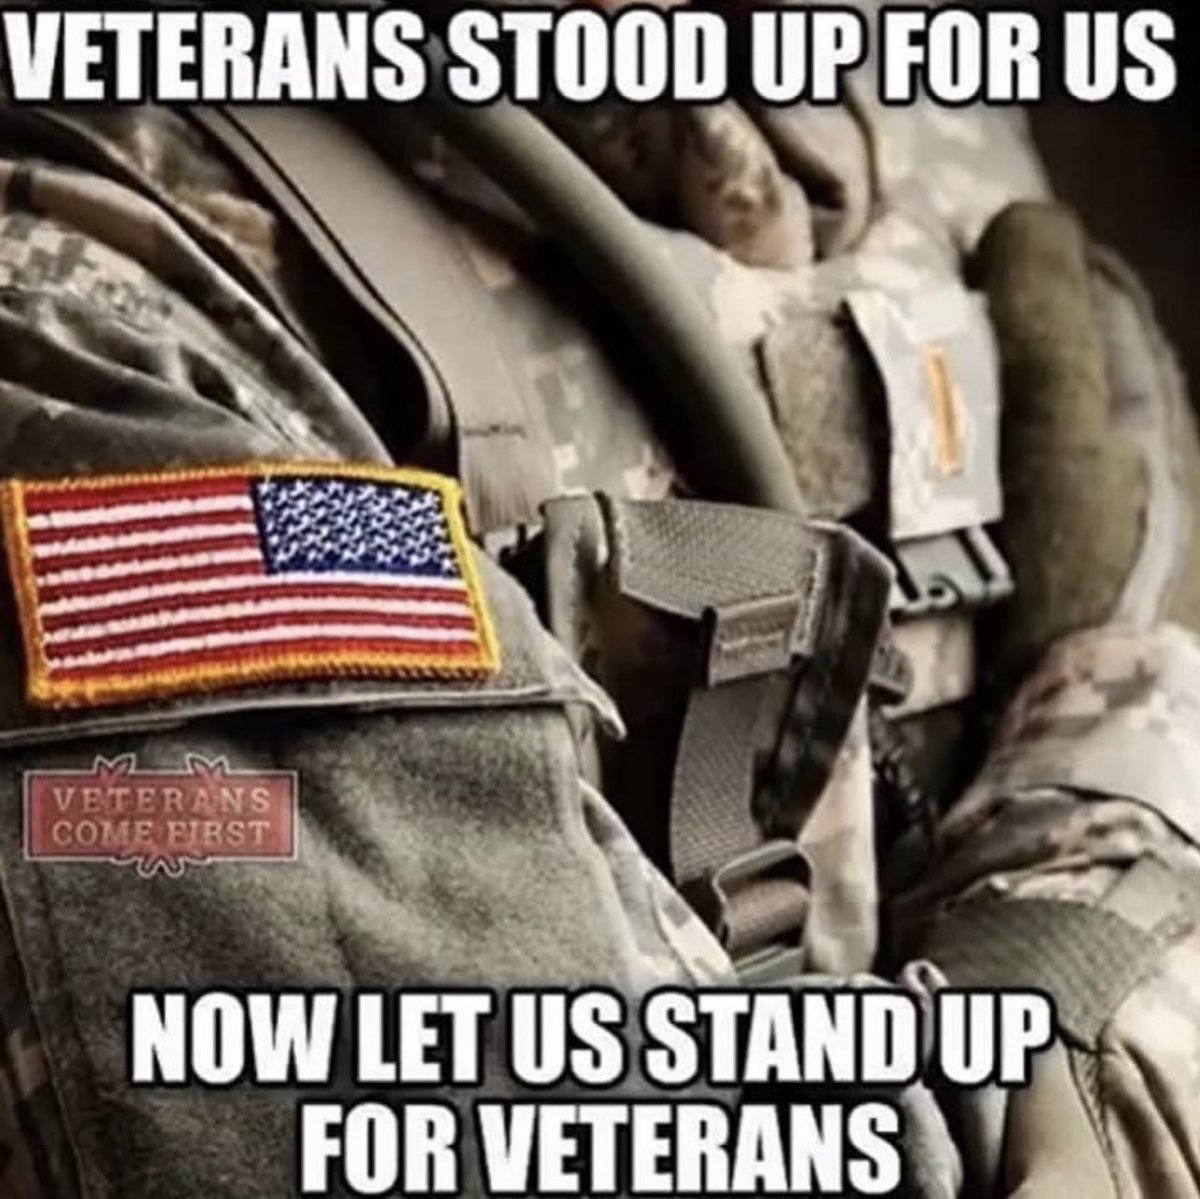 Let us stand up for our Veterans